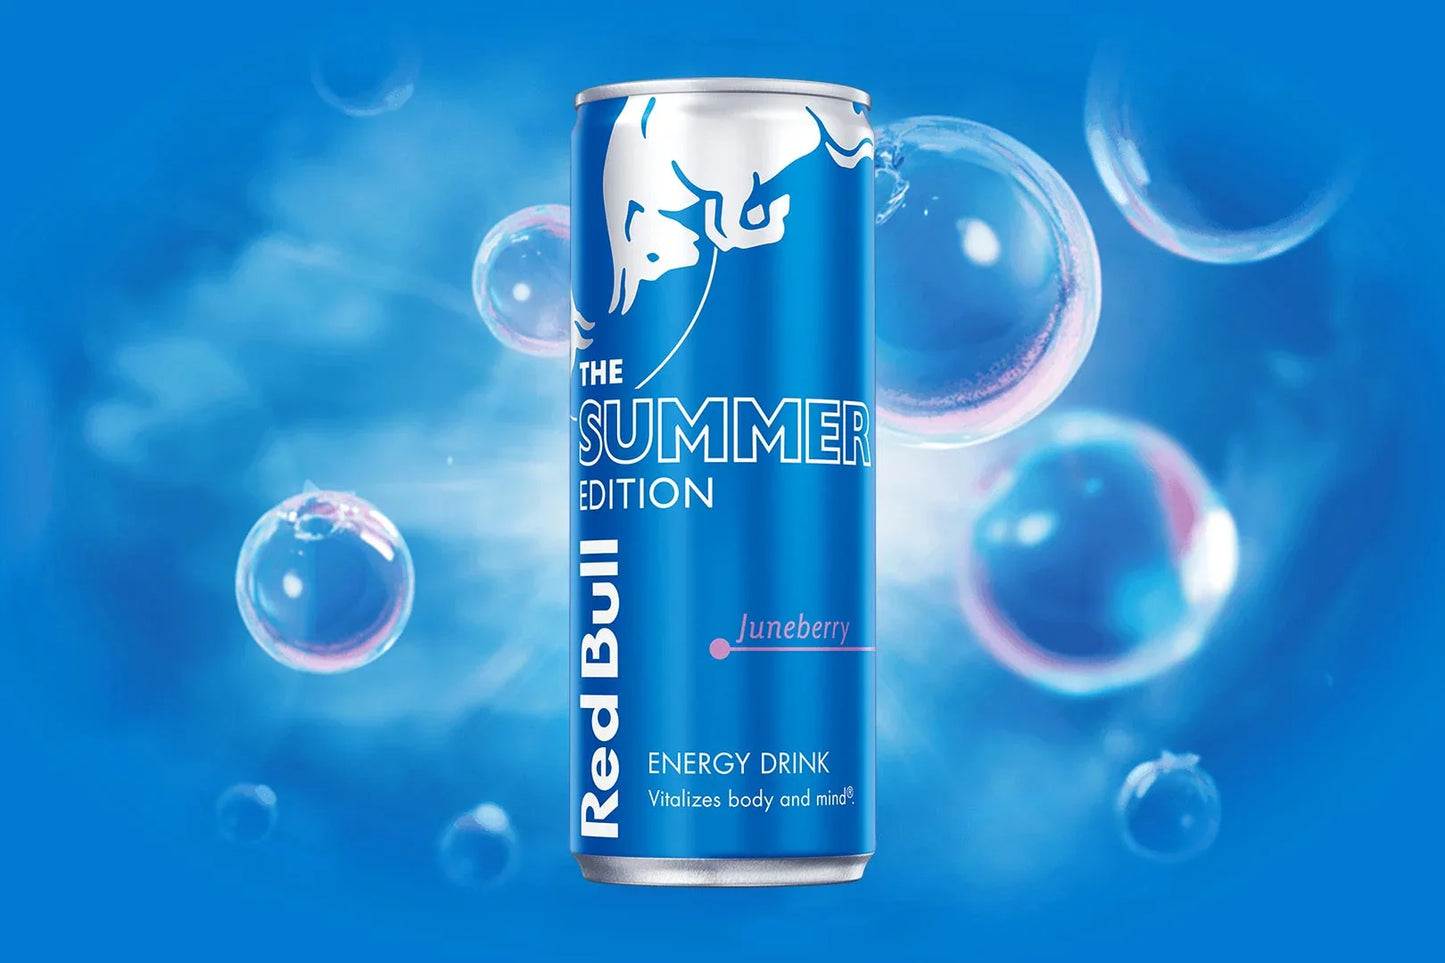 (Copy) Red Bull Energy Drink Summer Edition Juneberry